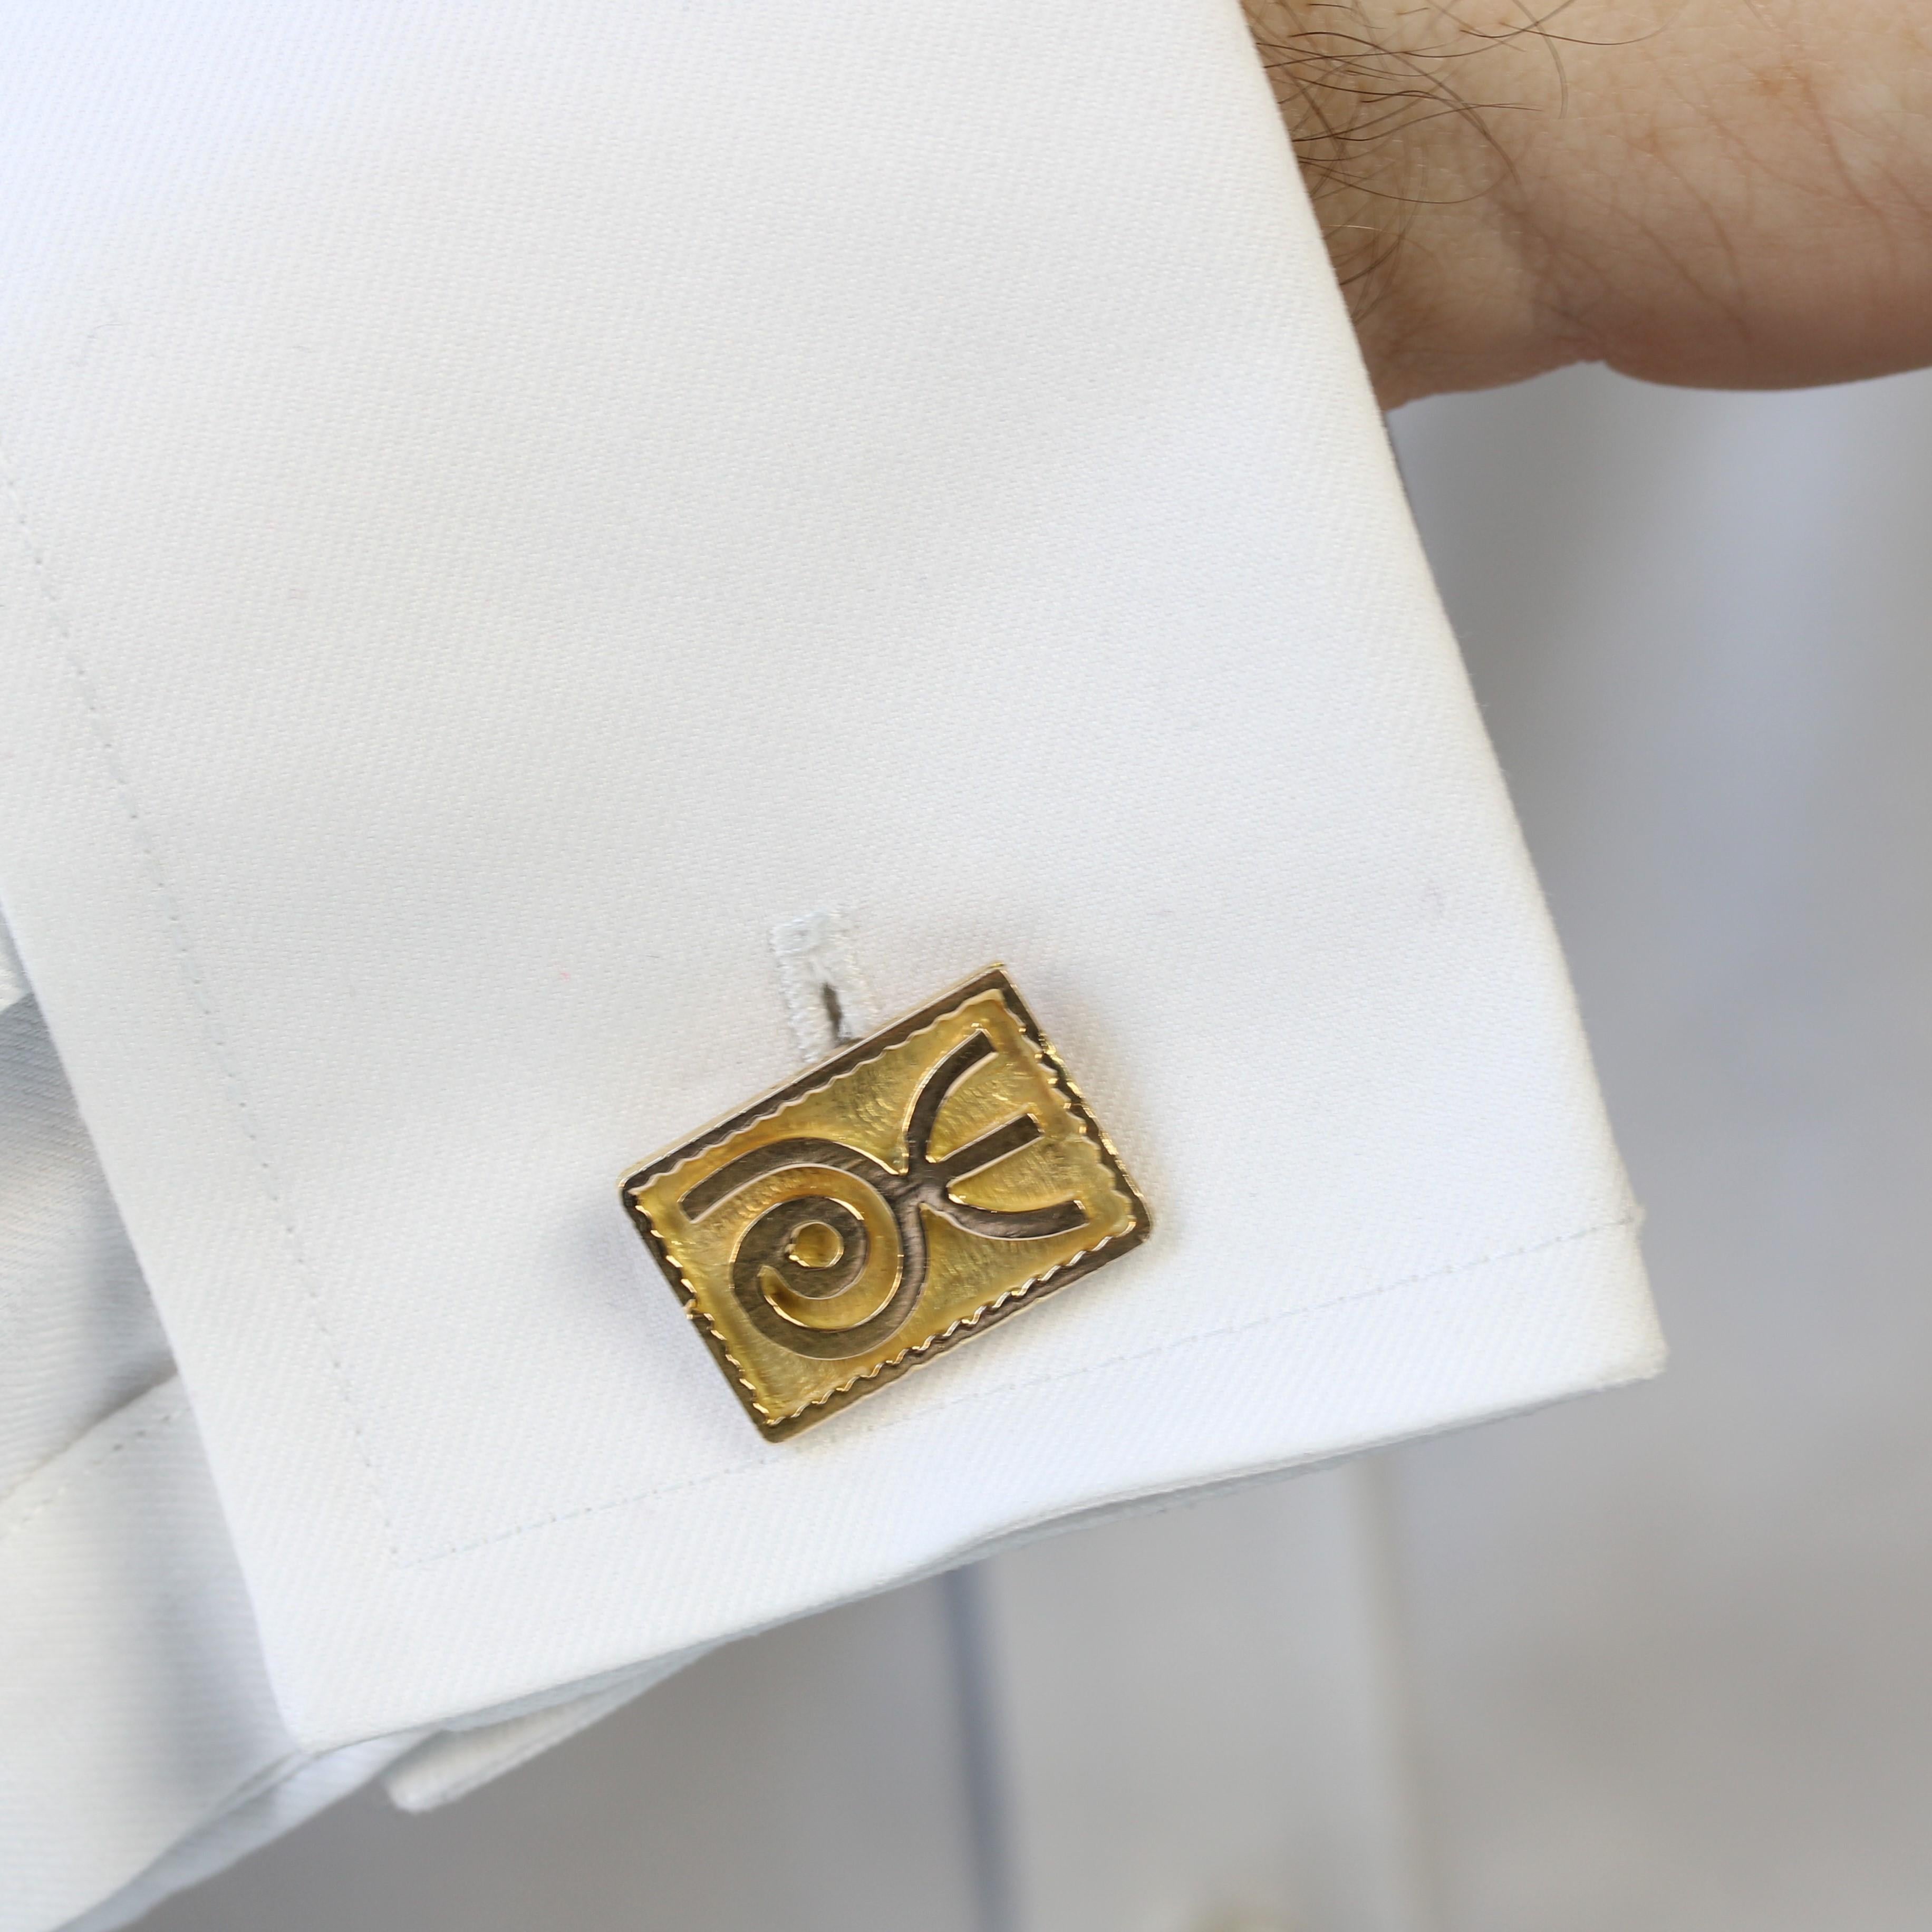 Pair of cufflinks in 18 karat yellow gold, eagle head hallmark.
Original retro cufflinks in modernist style and rectangular shape, they present a stylized symbol on brushed gold and bordered with indentations. They are attached to a second part of